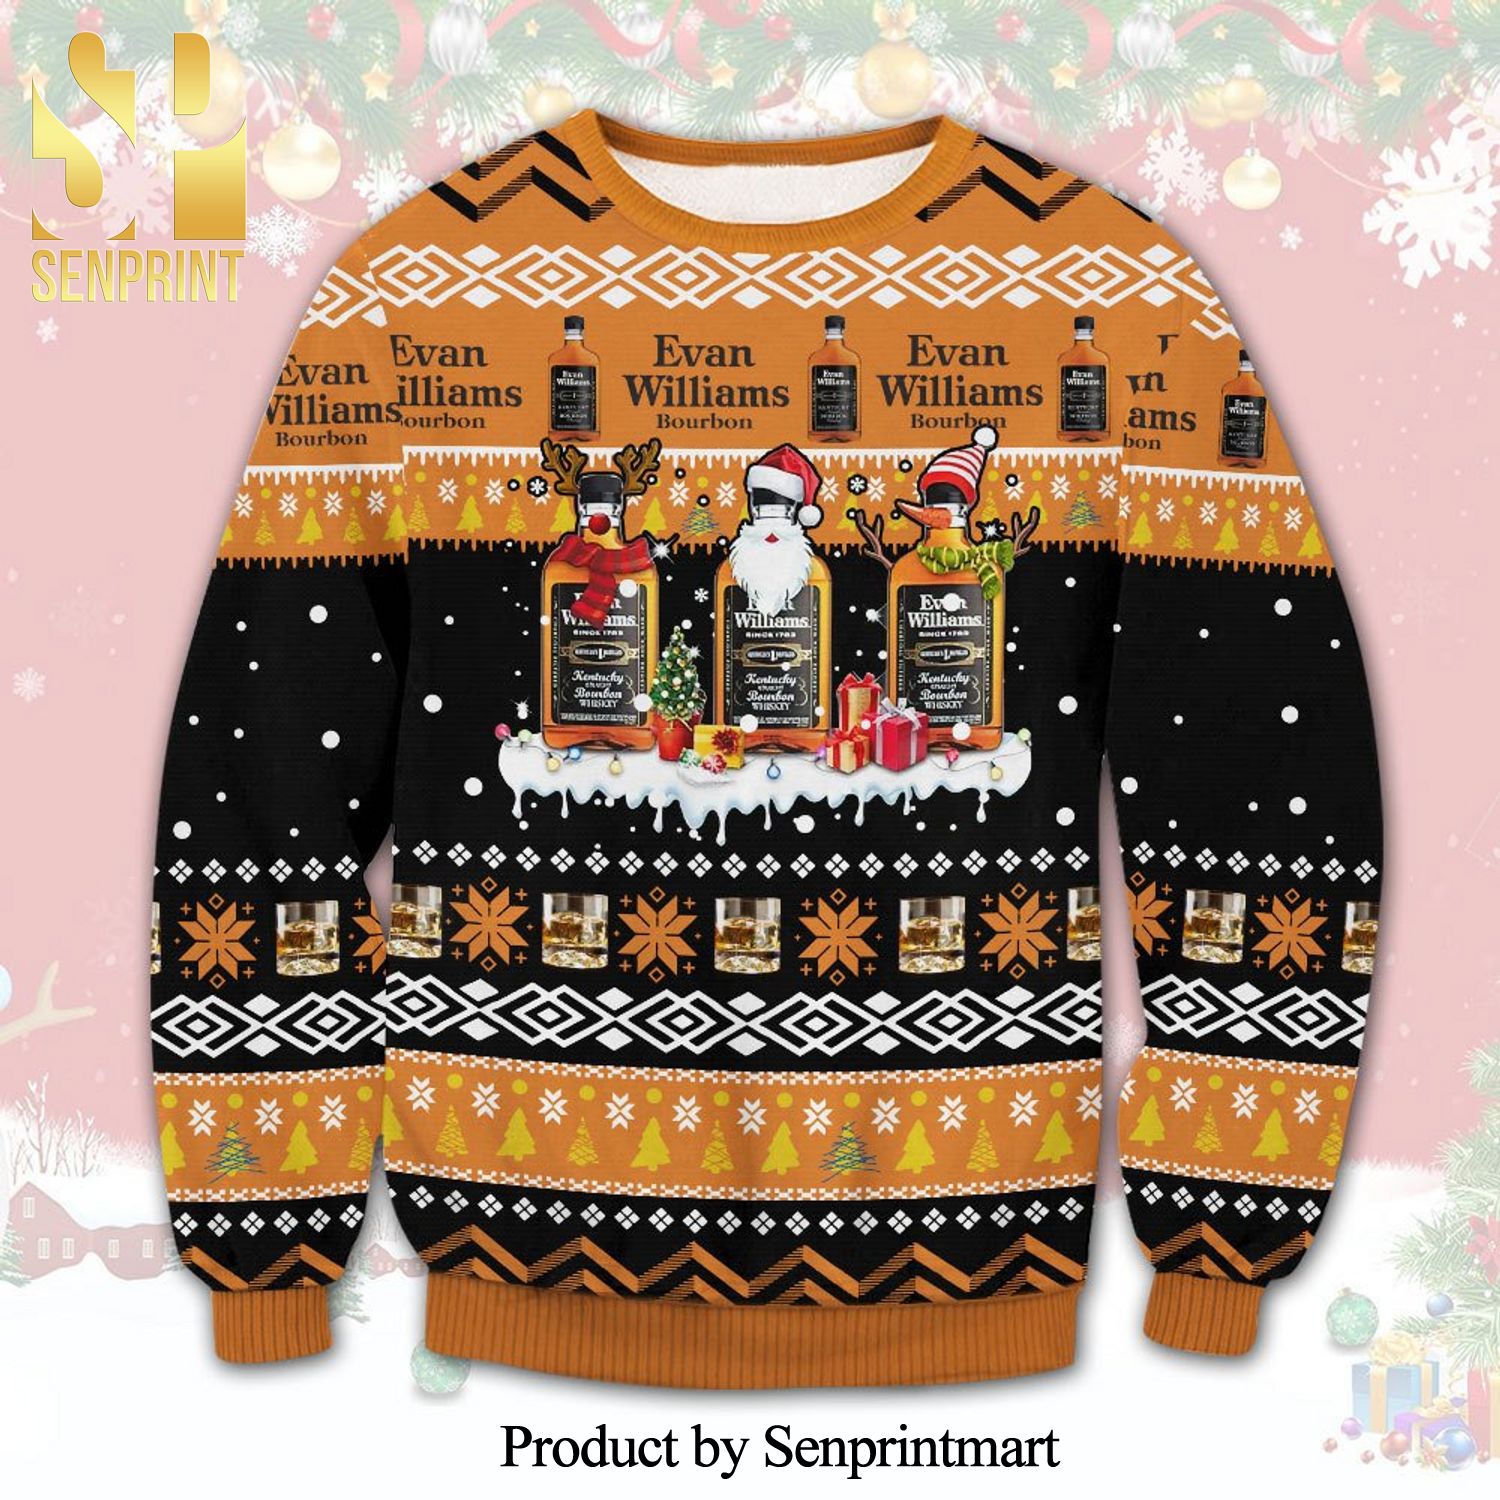 Evan Williams Bourbon Knitted Ugly Christmas Sweater